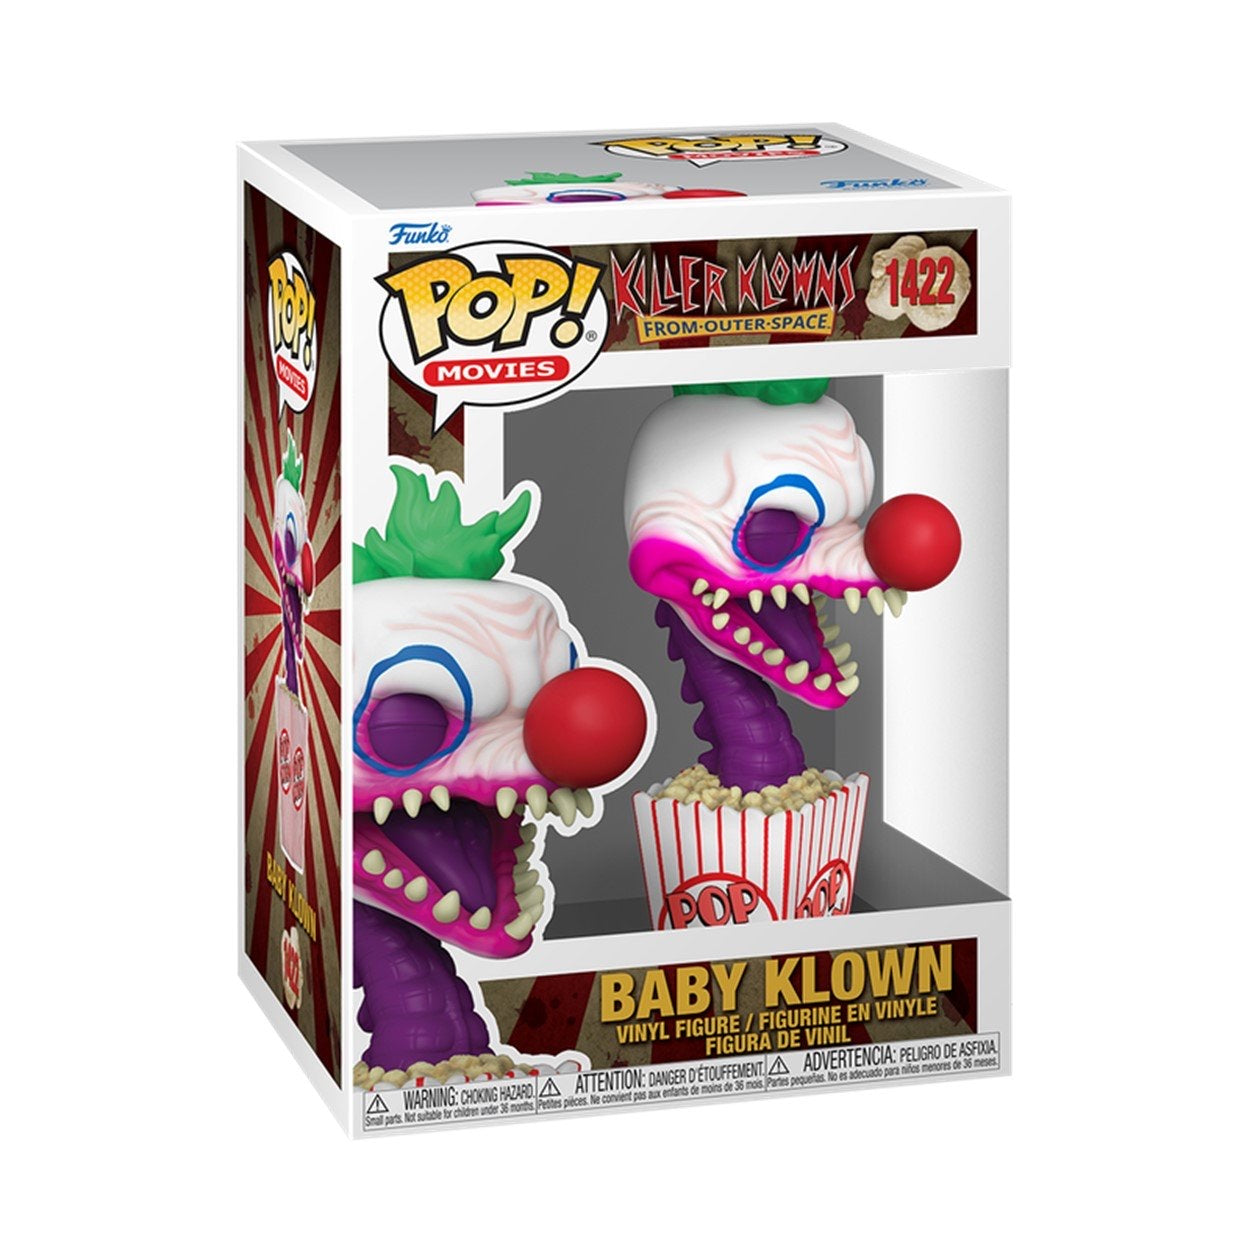 Funko Pop! Killer Klowns From Outer Space Baby Klown 1422 + Free Protector